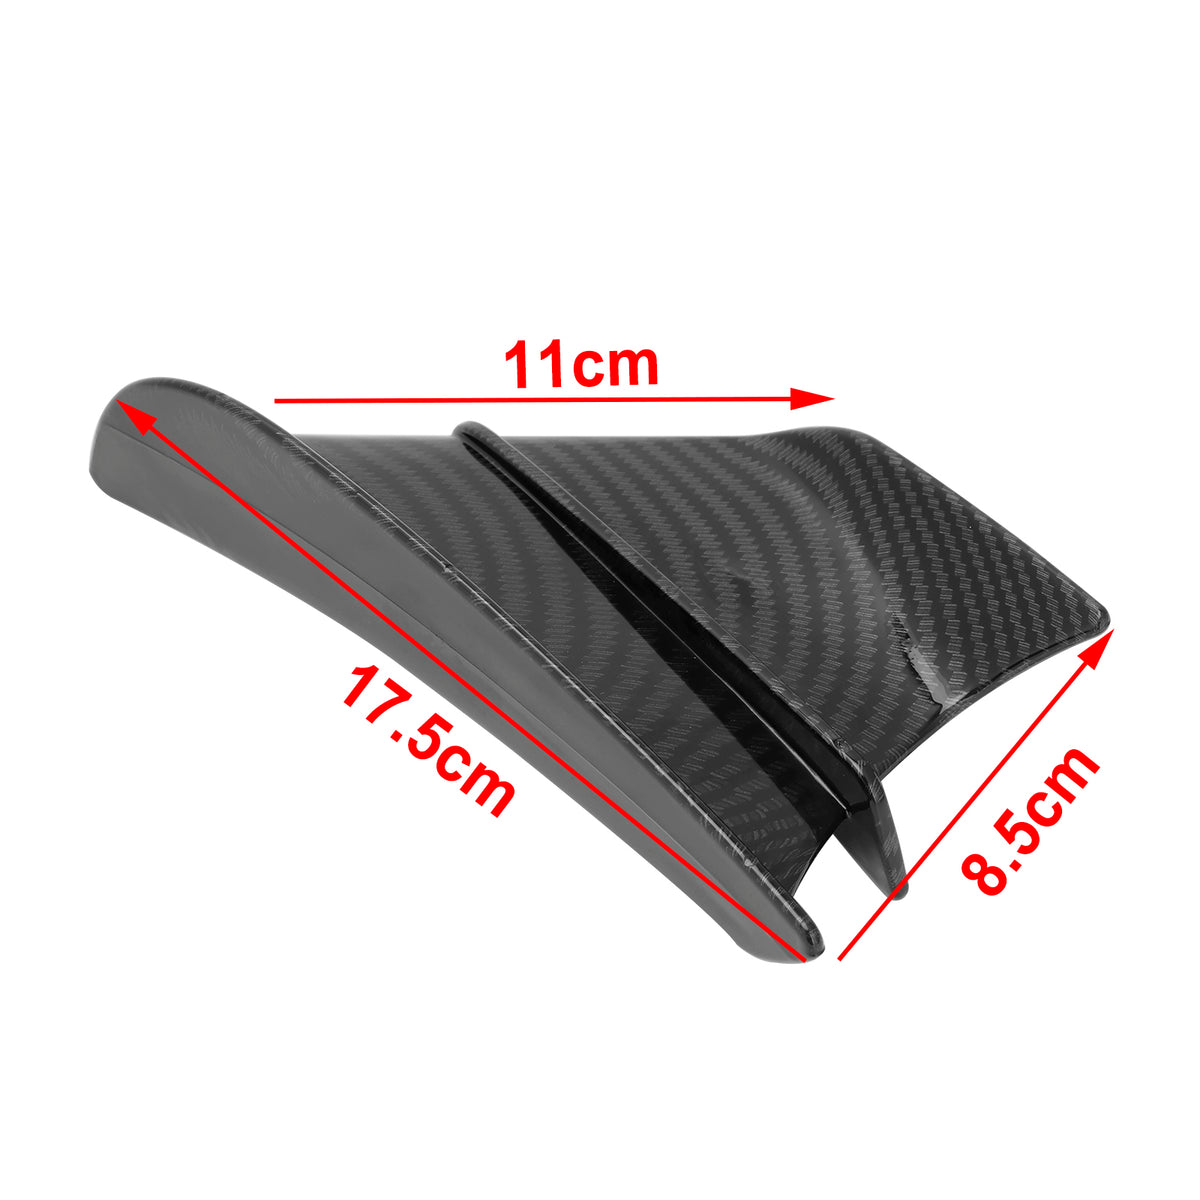 Winglet Wind Fin Aerodynamic Kit Spoiler Trim Cover For Motorcycle Universal